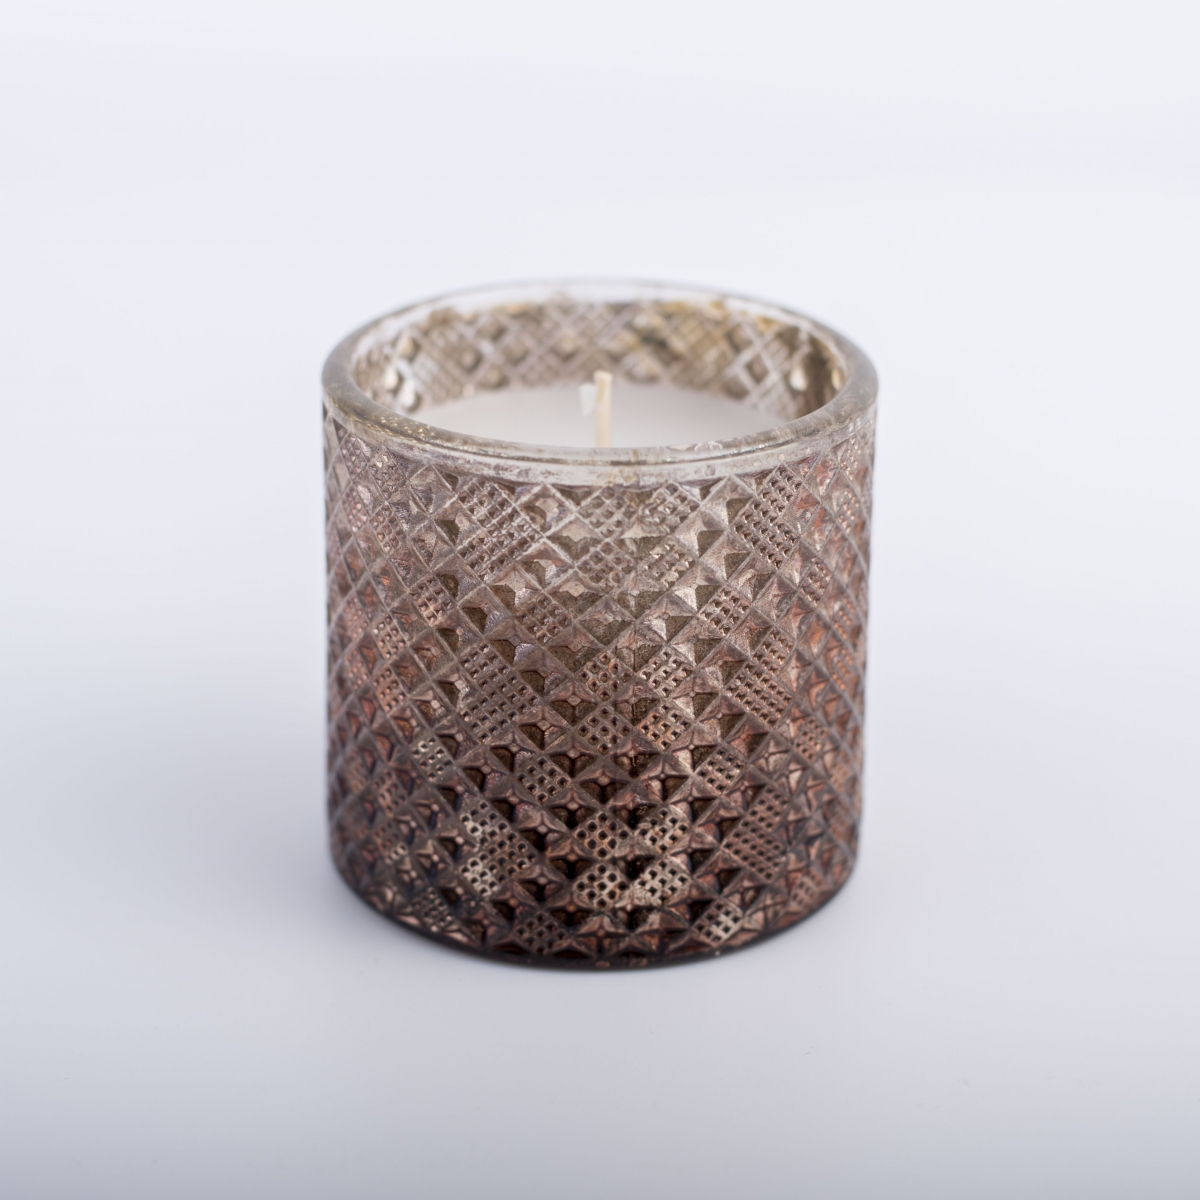 Retro Candles -Gold Gradient Brown ,Soy Wax ,Scented Candles ,Cube Embossed Glass Jar ,China Factory ,Price-HOWCANDLE-Candles,Scented Candles,Aromatherapy Candles,Soy Candles,Vegan Candles,Jar Candles,Pillar Candles,Candle Gift Sets,Essential Oils,Reed Diffuser,Candle Holder,